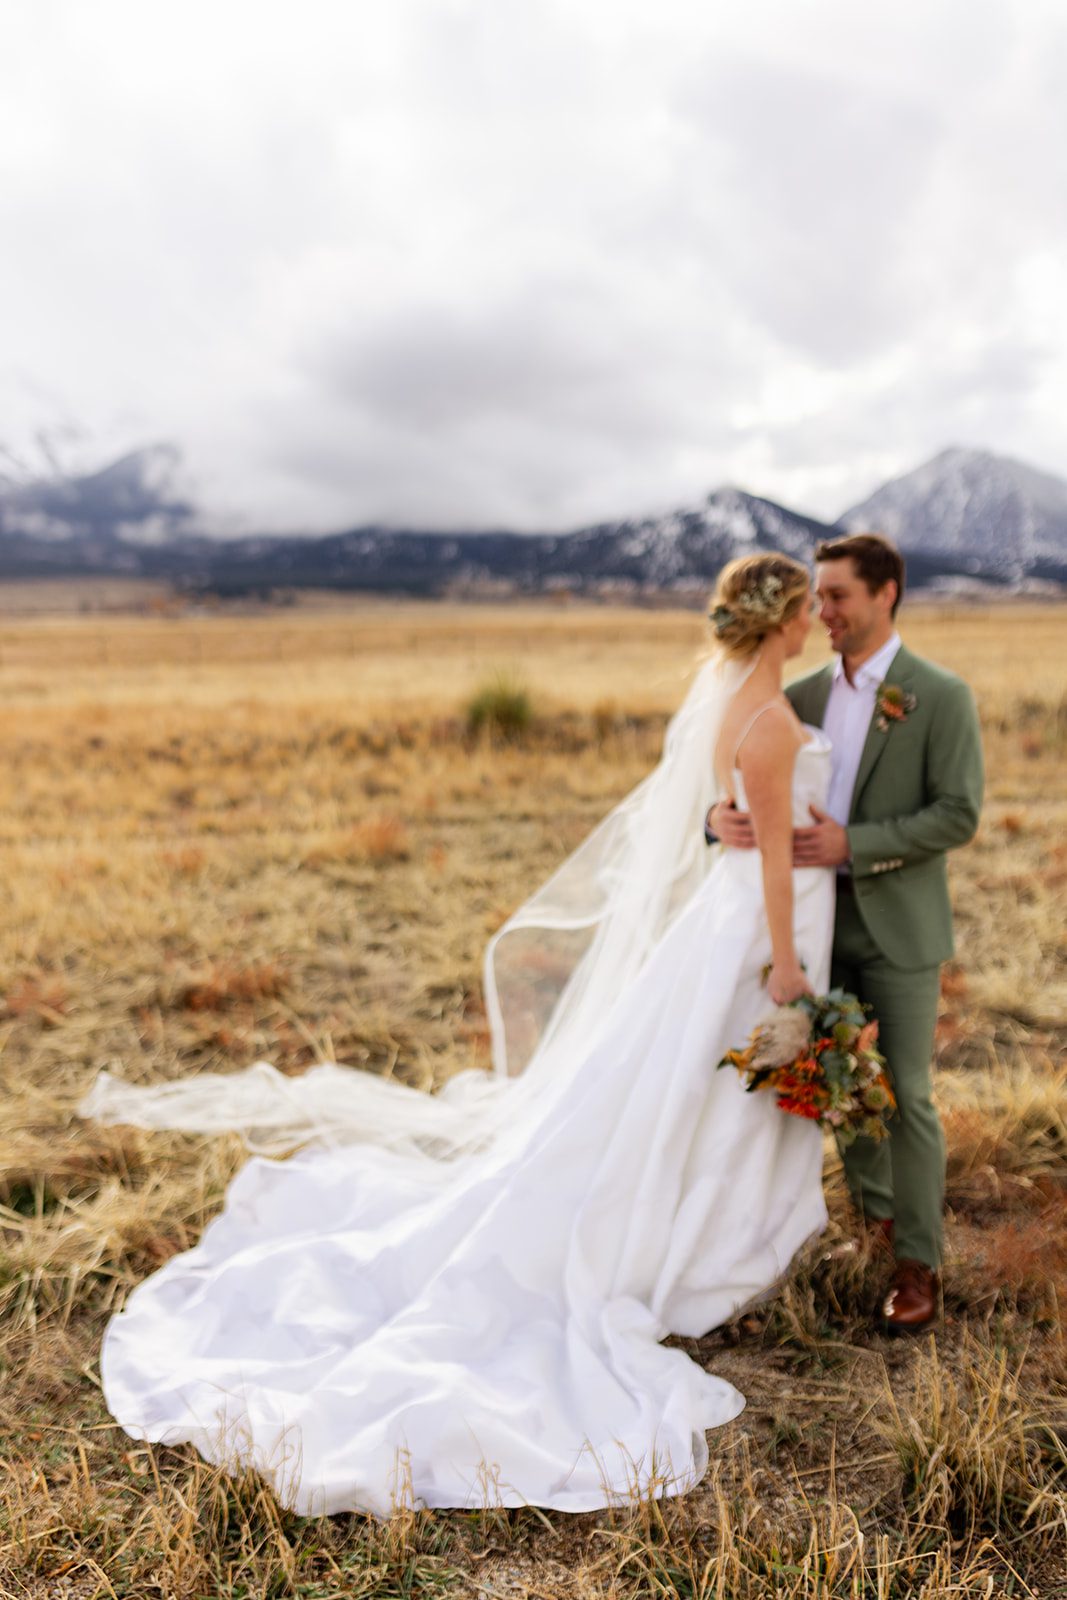 Wedding photography at The Barn at Sunset Ranch in Buena Vista Colorado, Bride with long veil, Green groom suit, Mountain wedding inspiration, Boho wedding bouquet, Bridal updo